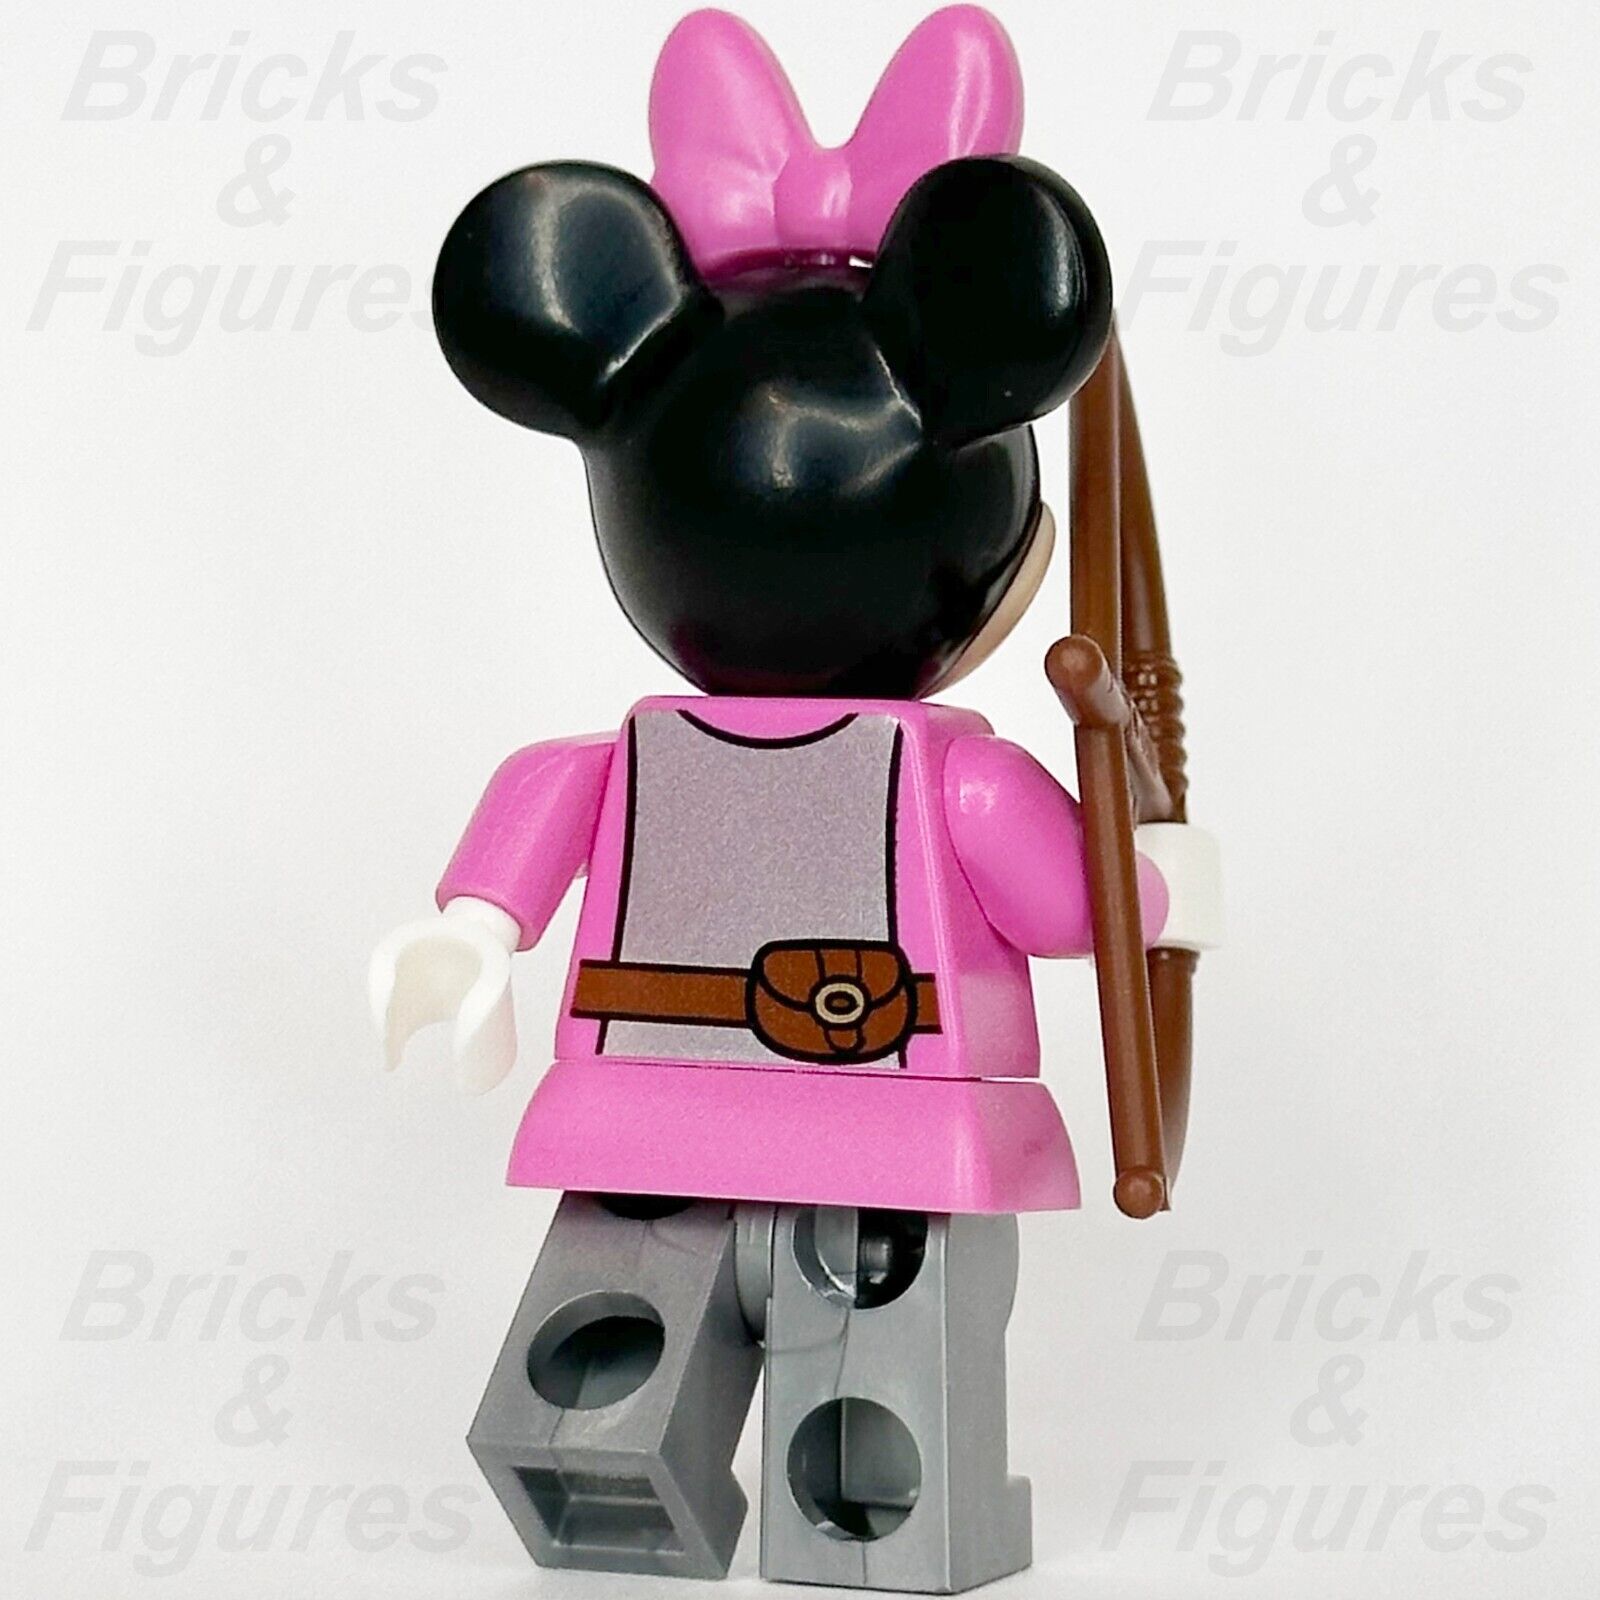 LEGO Disney Minnie Mouse Knight Minifigure Mickey and Friends 10780 dis077